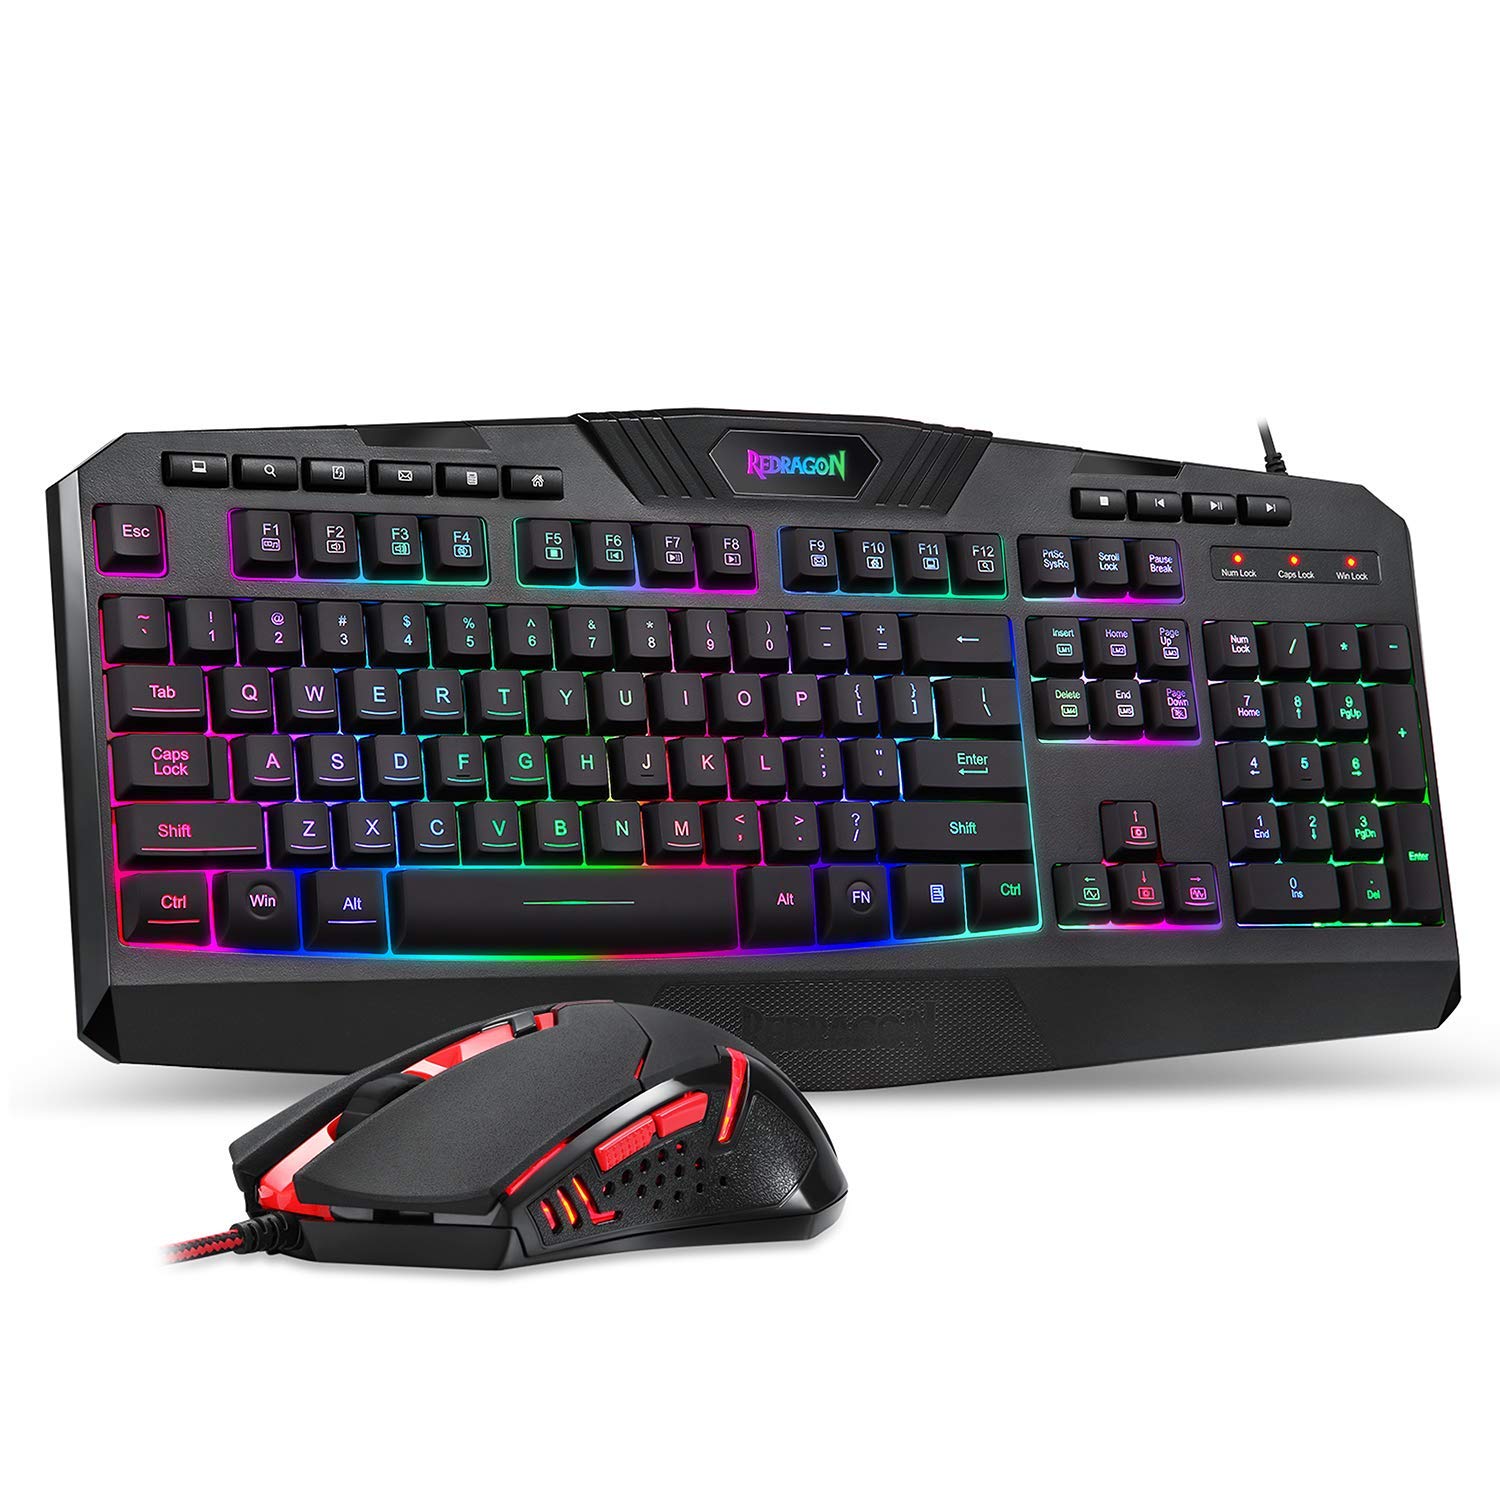 Book Cover Redragon S101 Gaming Keyboard, M601 Mouse, RGB Backlit Gaming Keyboard, Programmable Backlit Gaming Mouse, Value Combo Set [New Version] Black